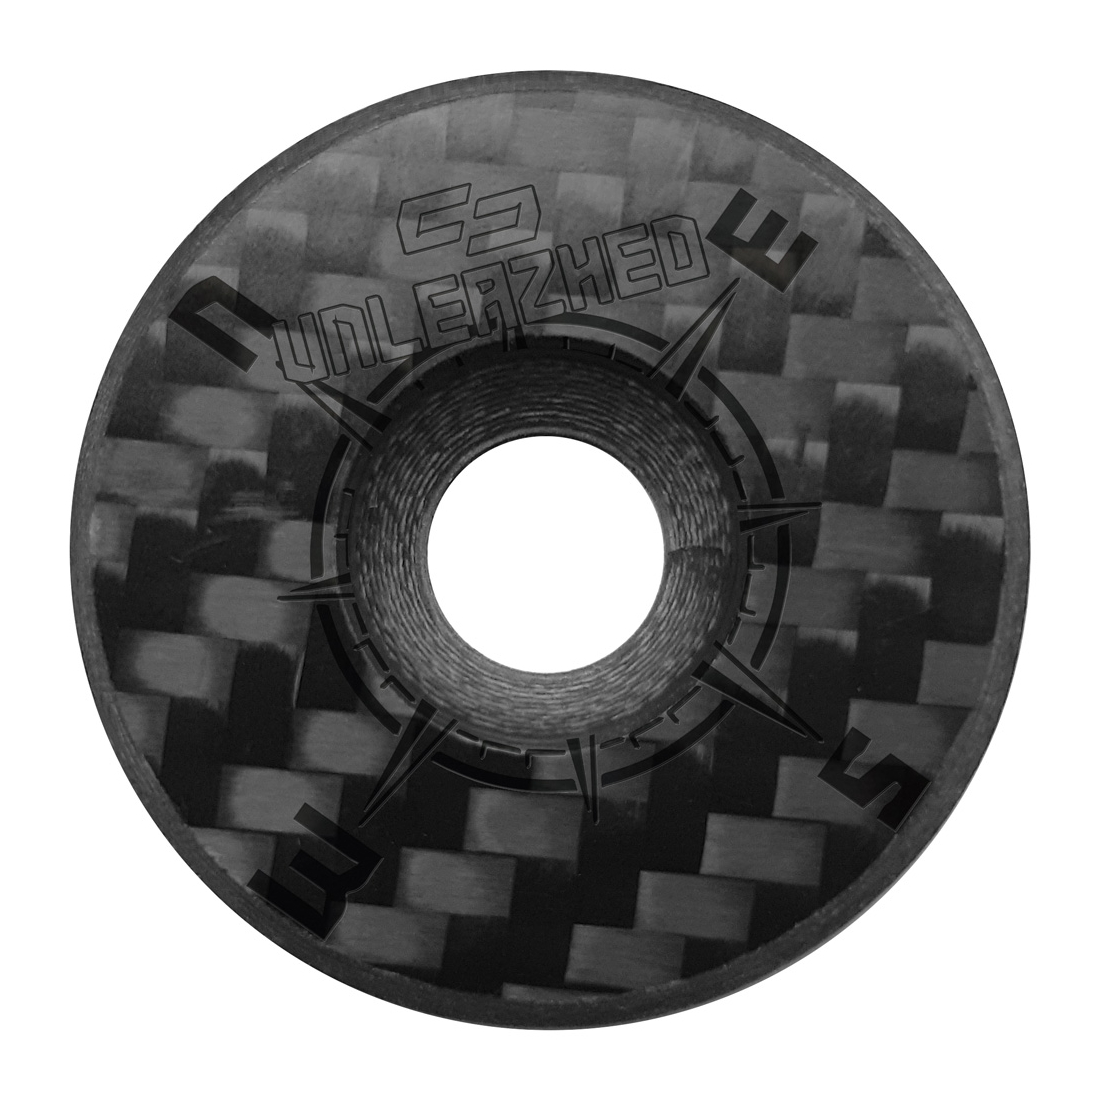 Image of Unleazhed Unloose Cf01 Top Cap - Carved Compass